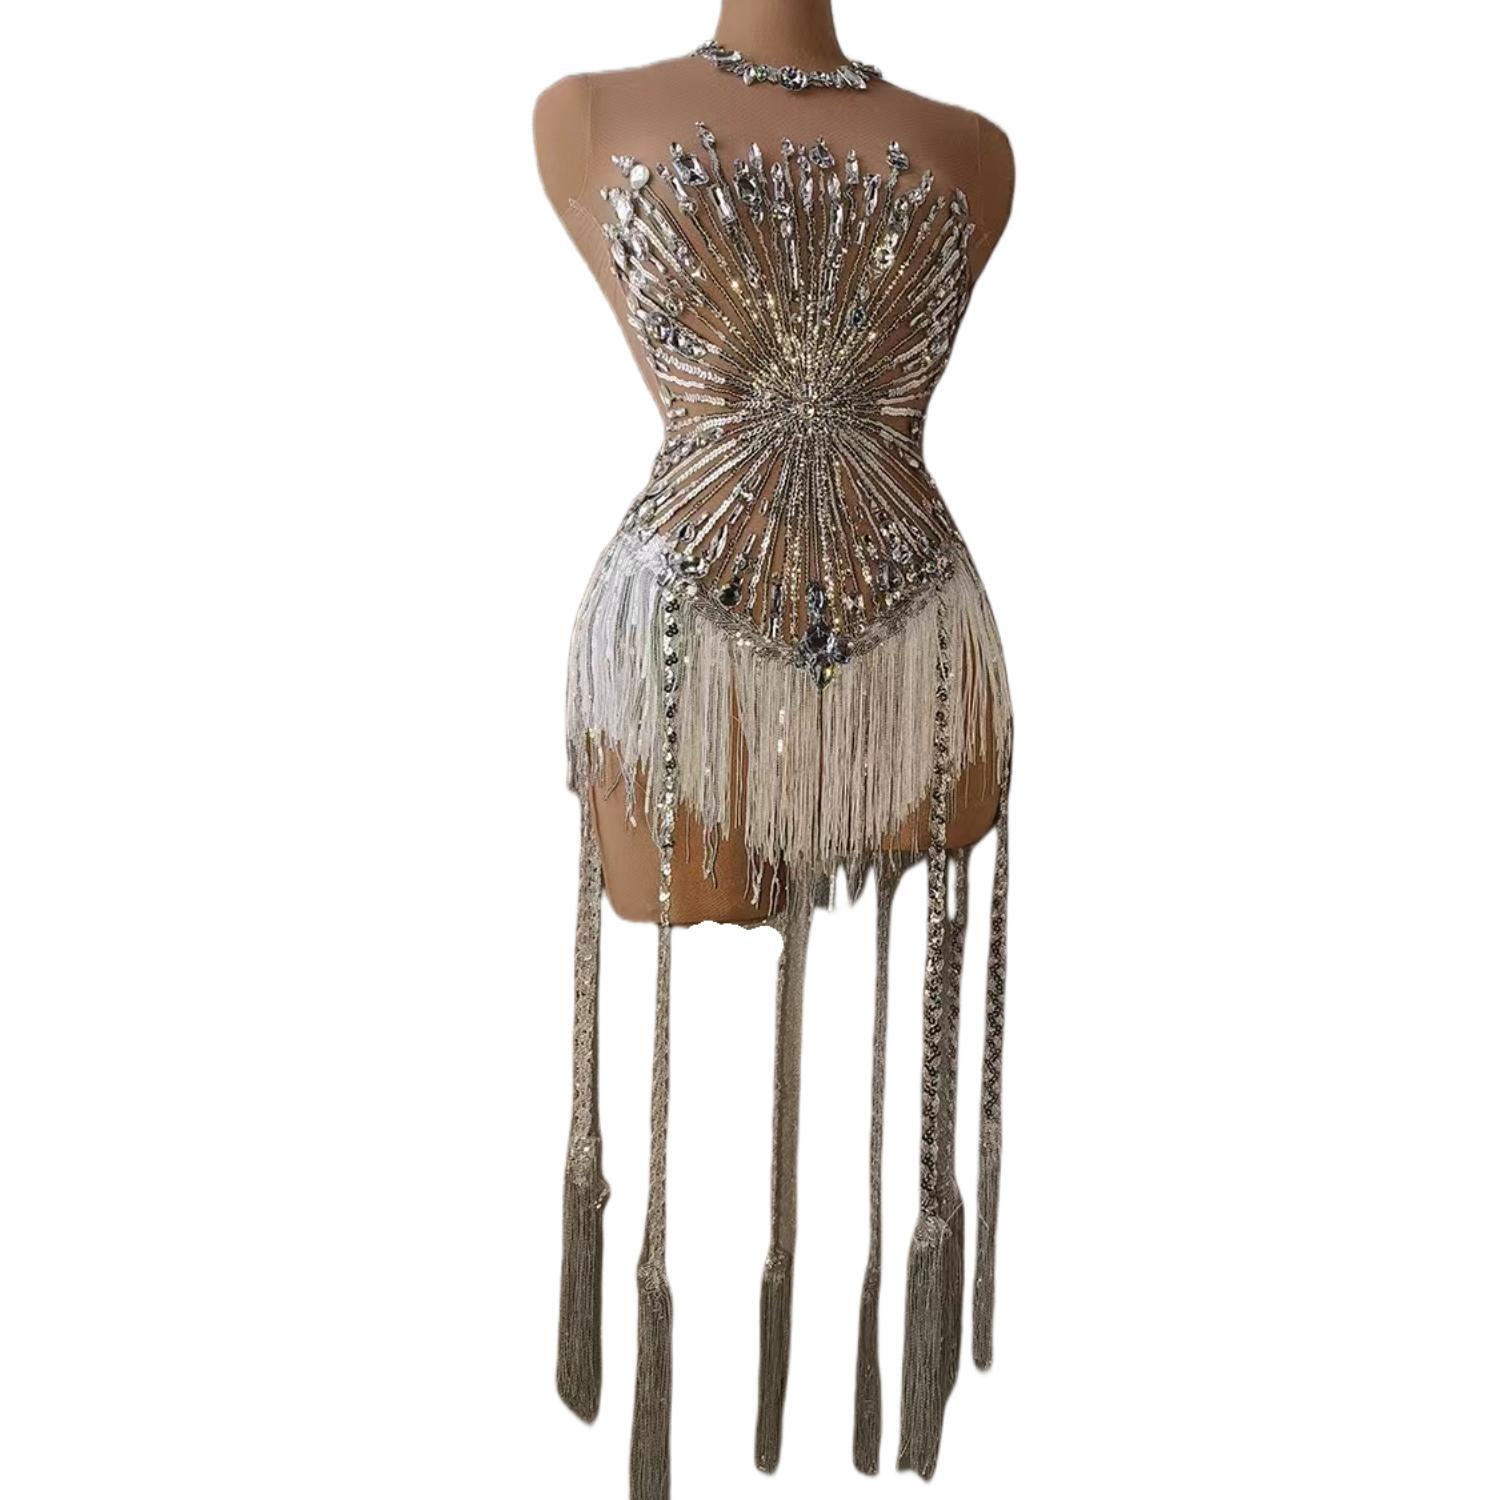 Sparkly Rhinestones Sequins Fringes Leotard Women Sexy Mesh Transparent Performance Dance Costume Stage Wear Club Outfit